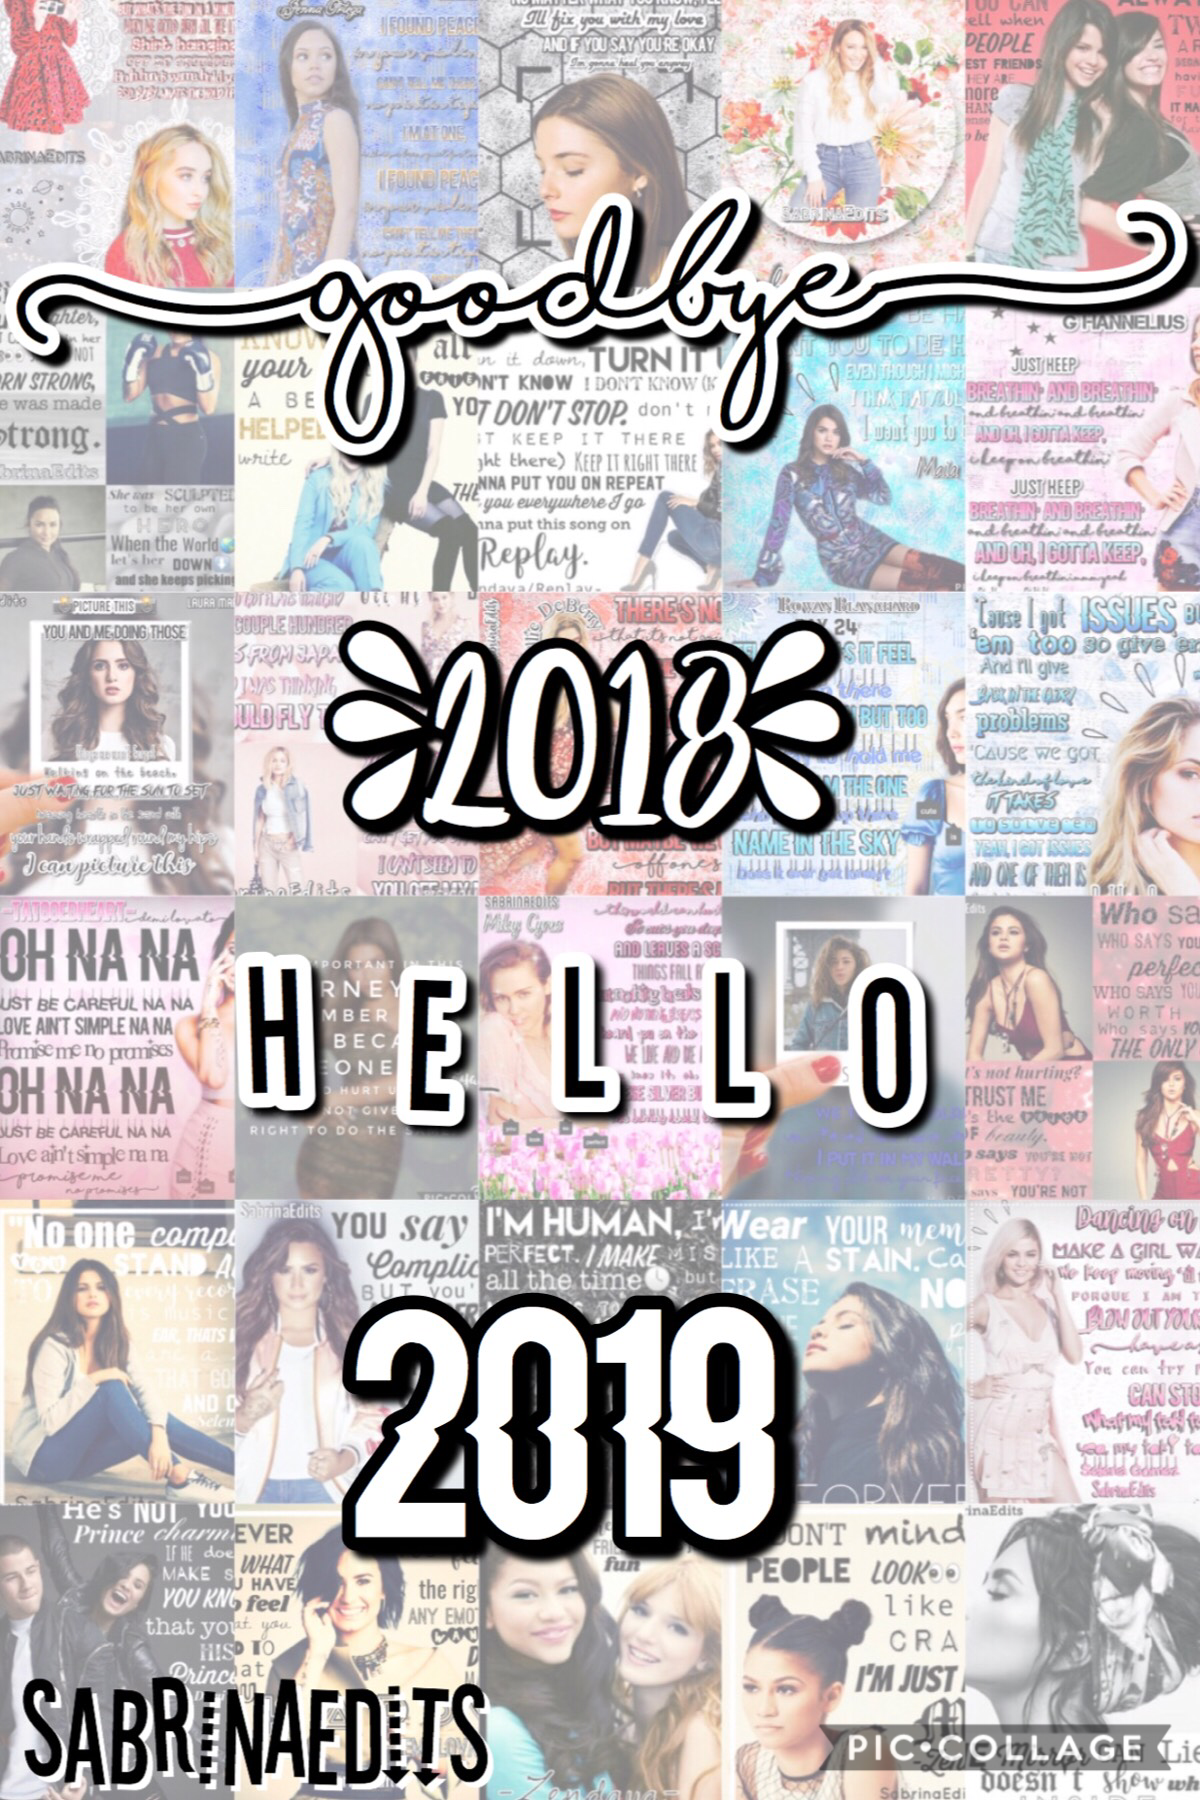 🍍TAP🍍
omg this has been such a crazy year i am so glad that i have PC!! i am so grateful for everyone on here who it so kind and makes PC so much fun!! i am so glad that you decide to read this and hope you have a great 2019!! 
comment “🎉” if you have rea